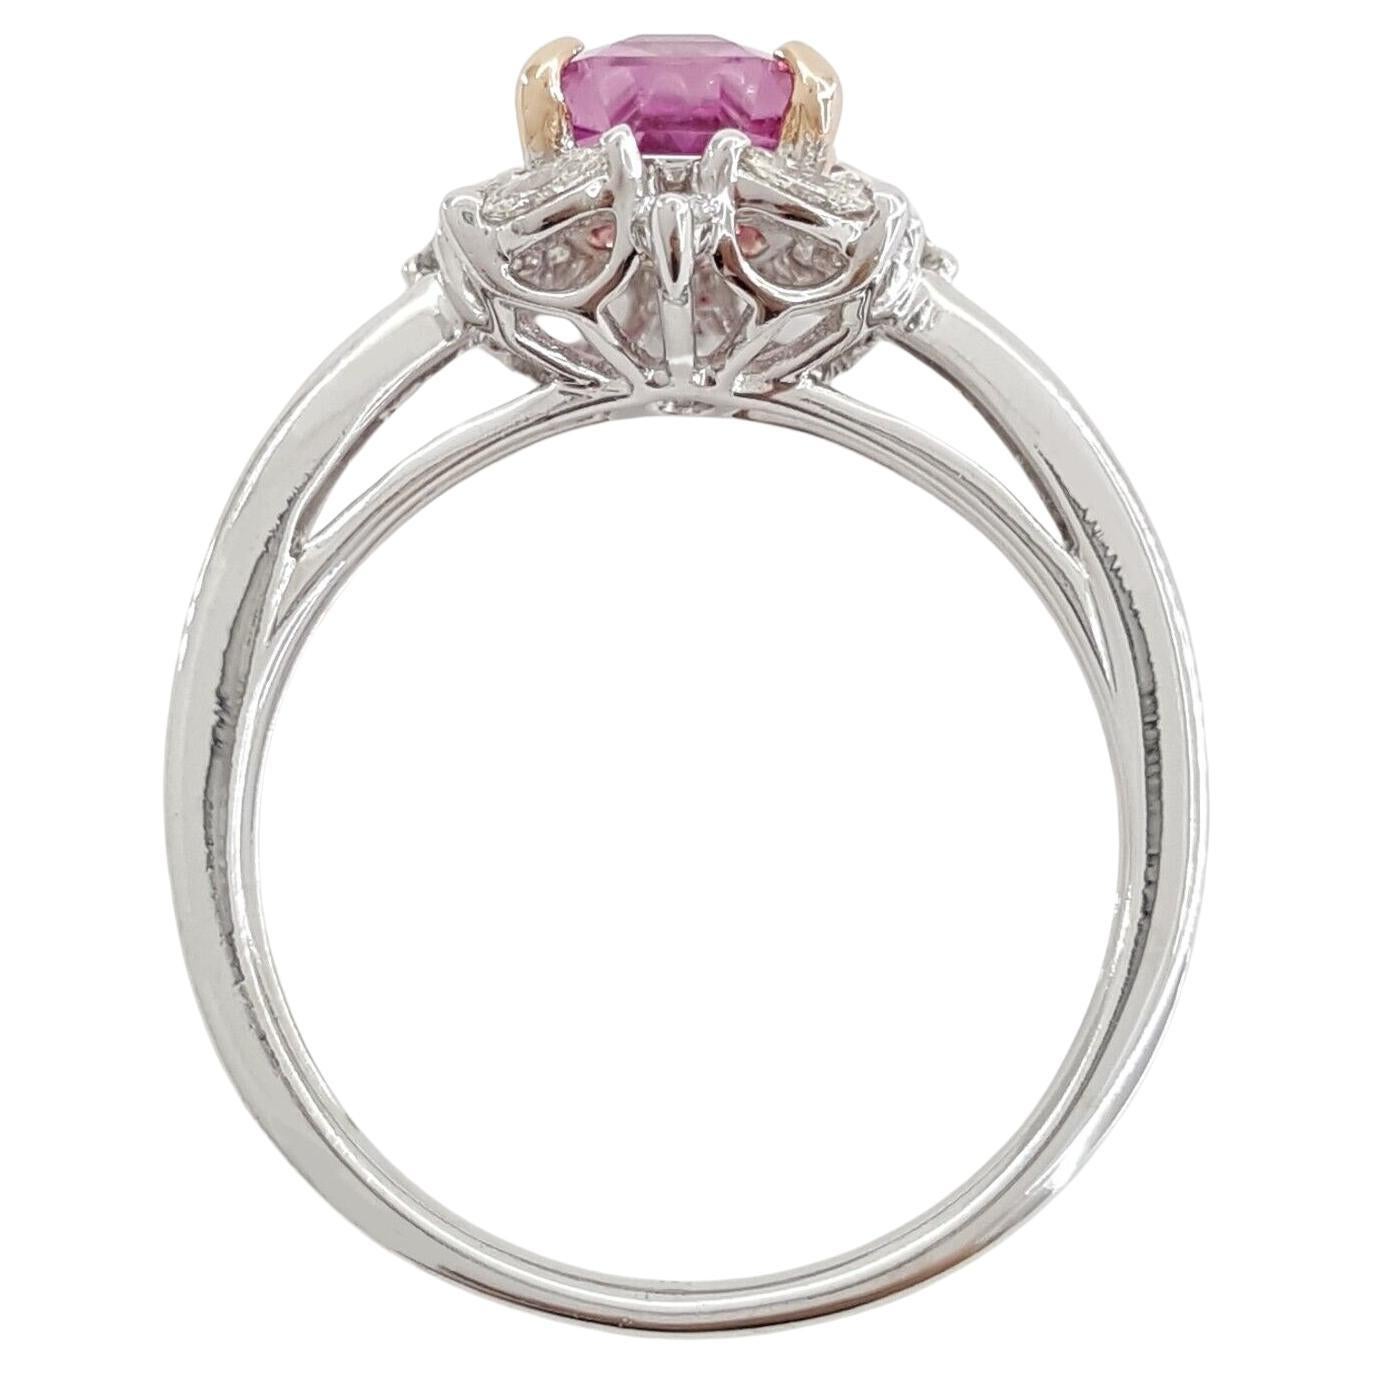 An Engagement/Anniversary Ring in 18k White & Rose Gold features a total weight of 2.4 carats, highlighting an Emerald Cut Pink Sapphire surrounded by a halo of Round and Marquise Cut Diamonds. Weighing 3.7 grams and sized 6.5, the central stone is